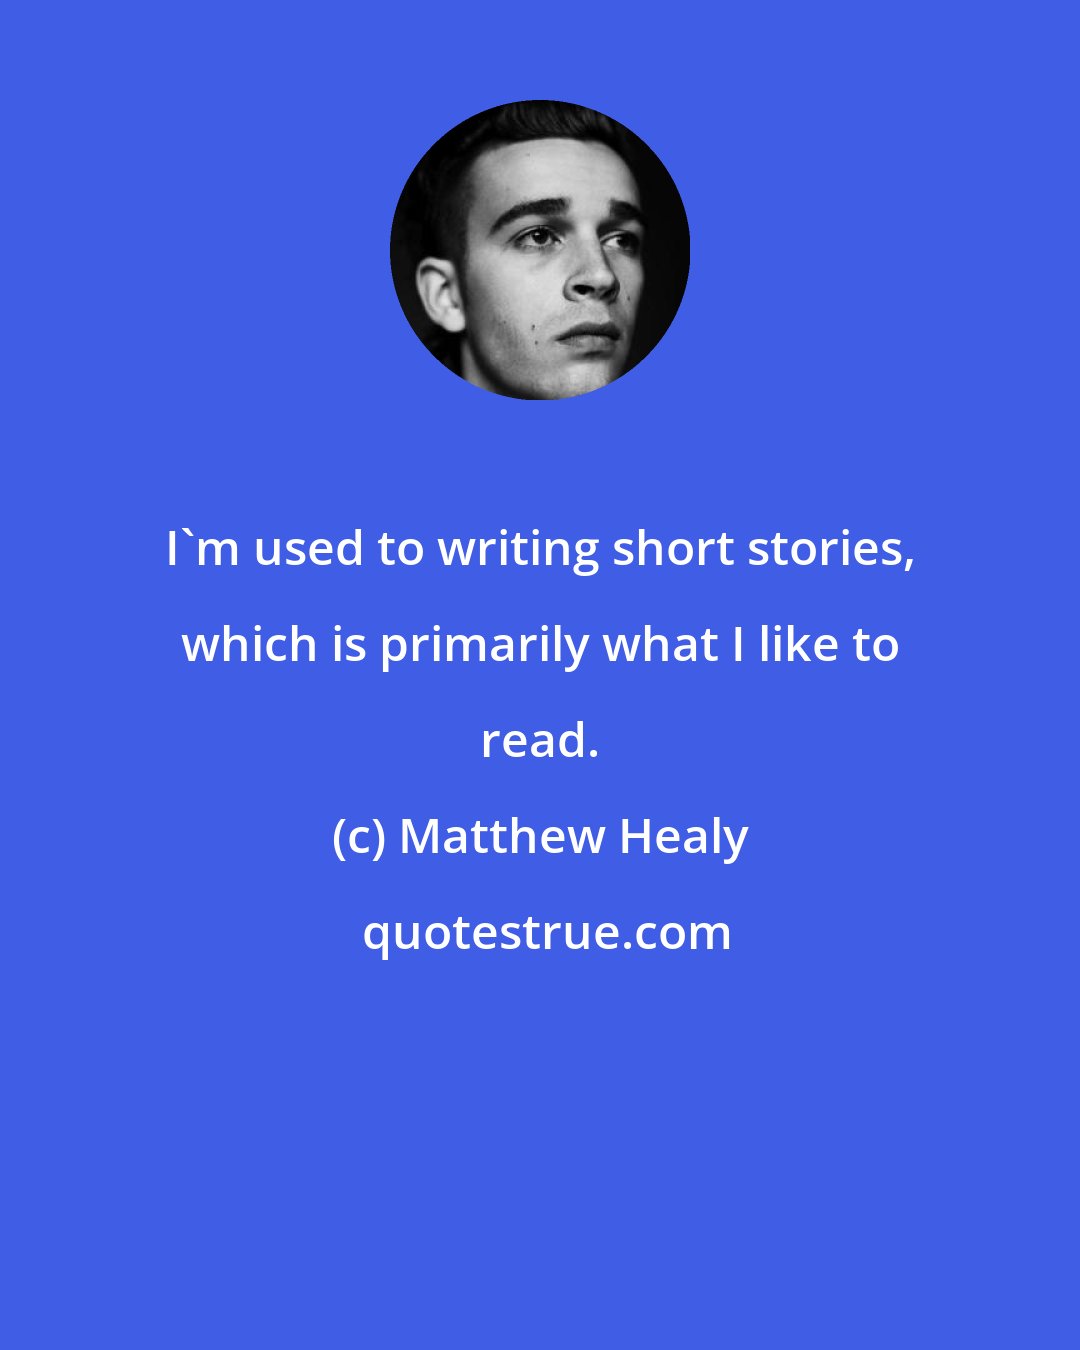 Matthew Healy: I'm used to writing short stories, which is primarily what I like to read.